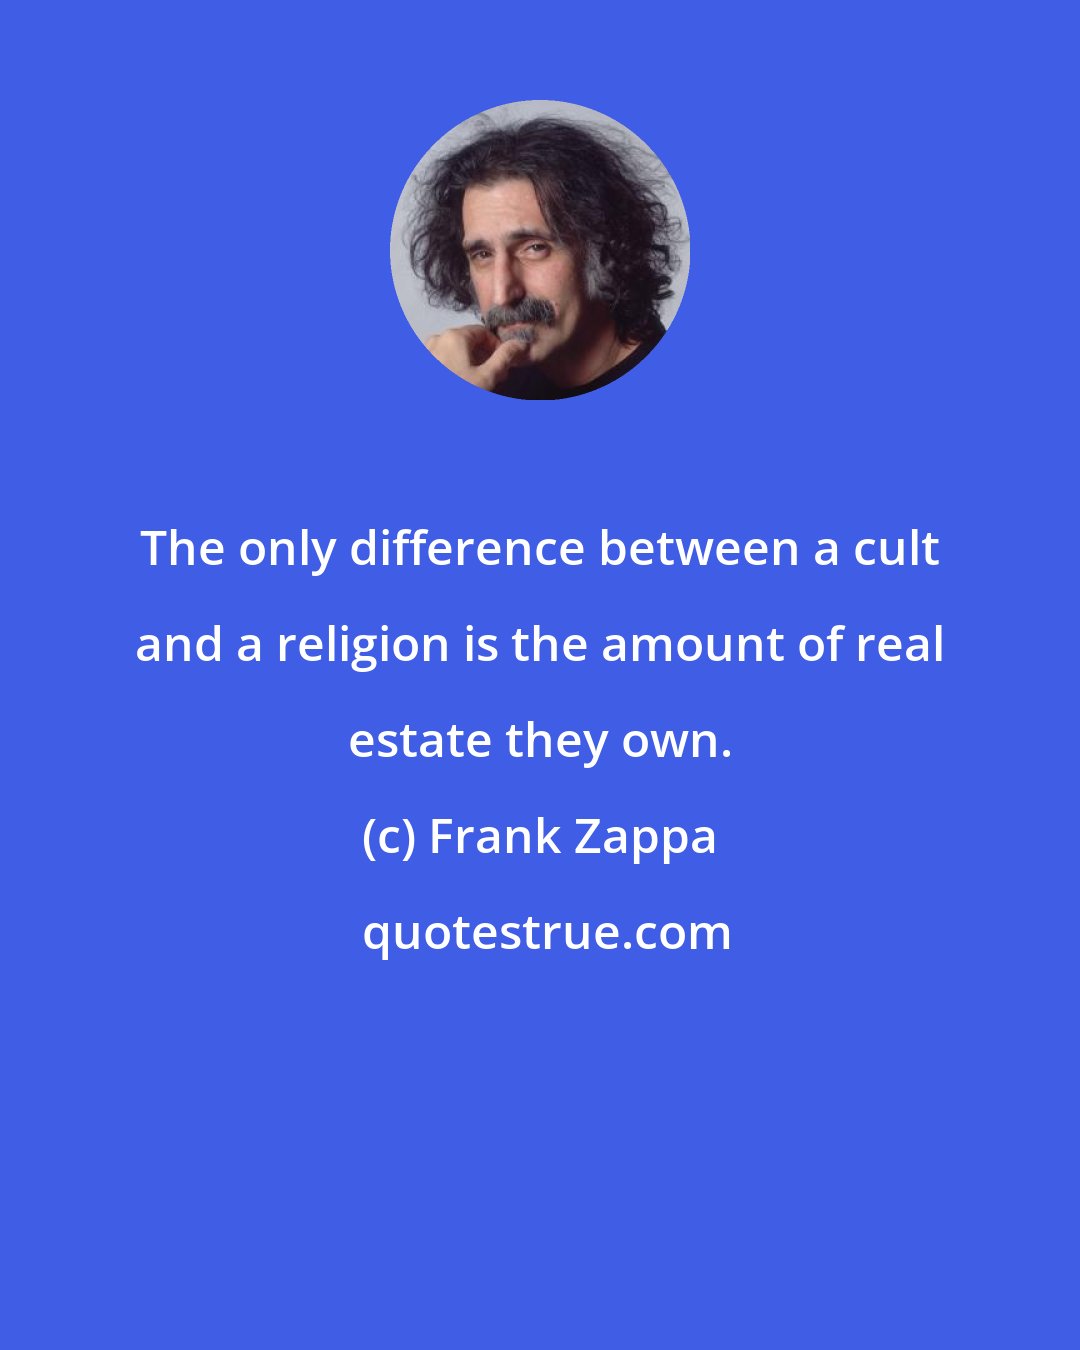 Frank Zappa: The only difference between a cult and a religion is the amount of real estate they own.